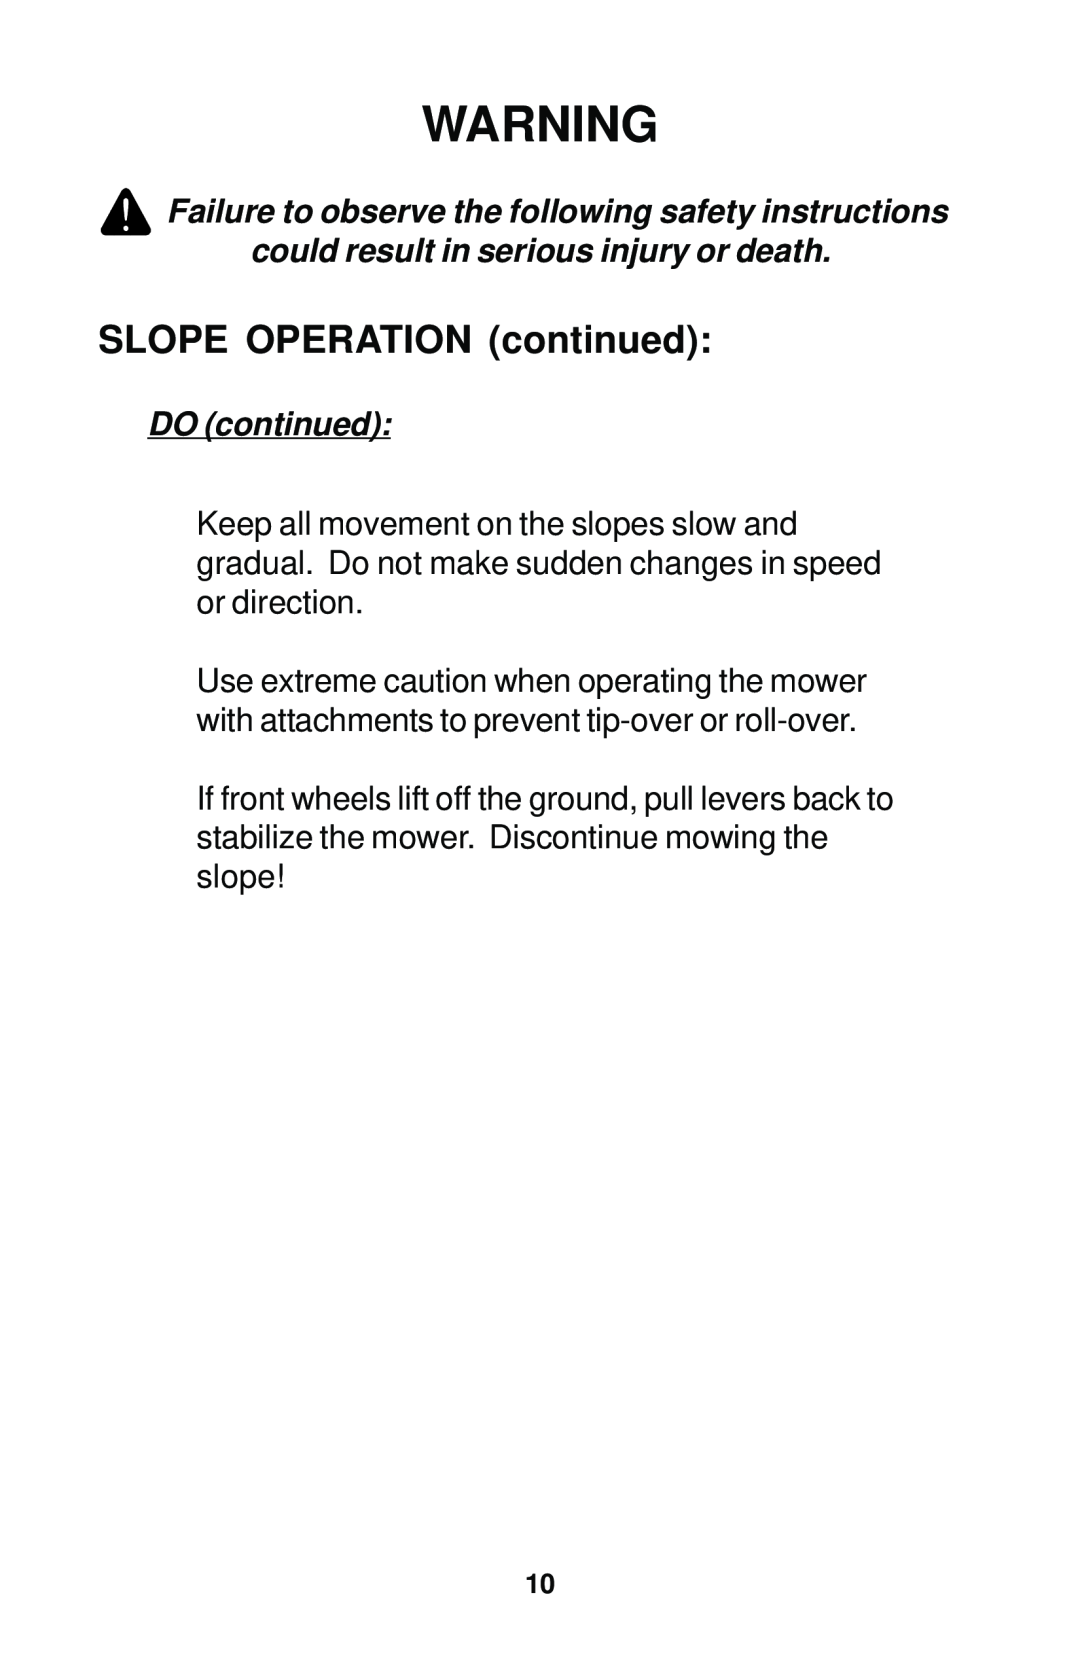 Dixon 17823-0704 manual SLOPE OPERATION continued, DO continued 